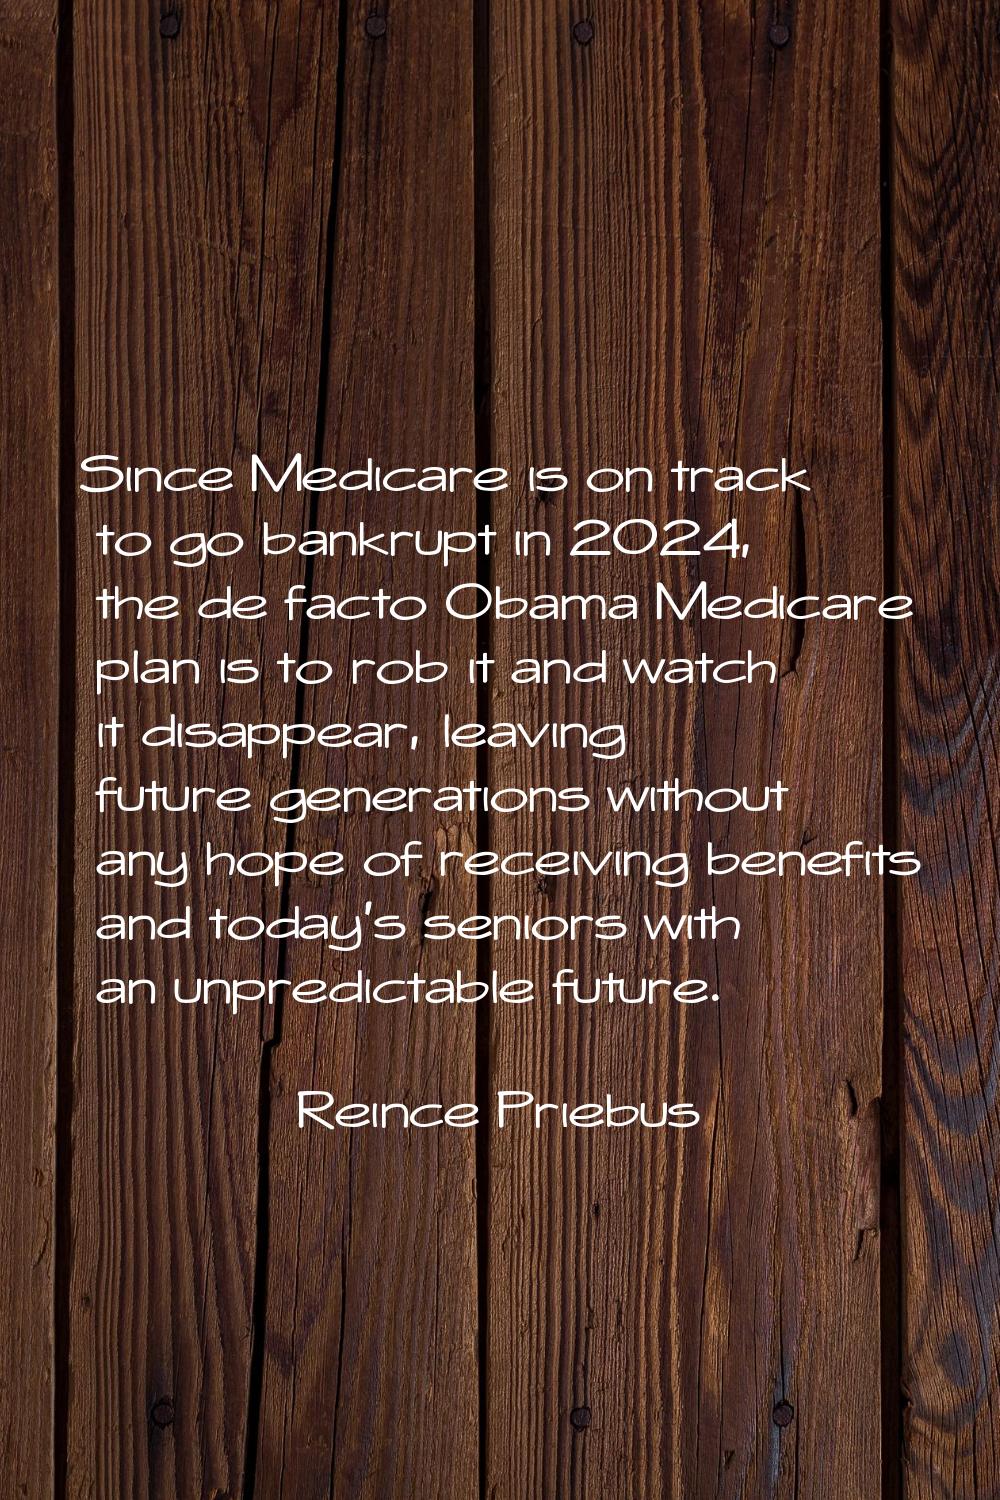 Since Medicare is on track to go bankrupt in 2024, the de facto Obama Medicare plan is to rob it an